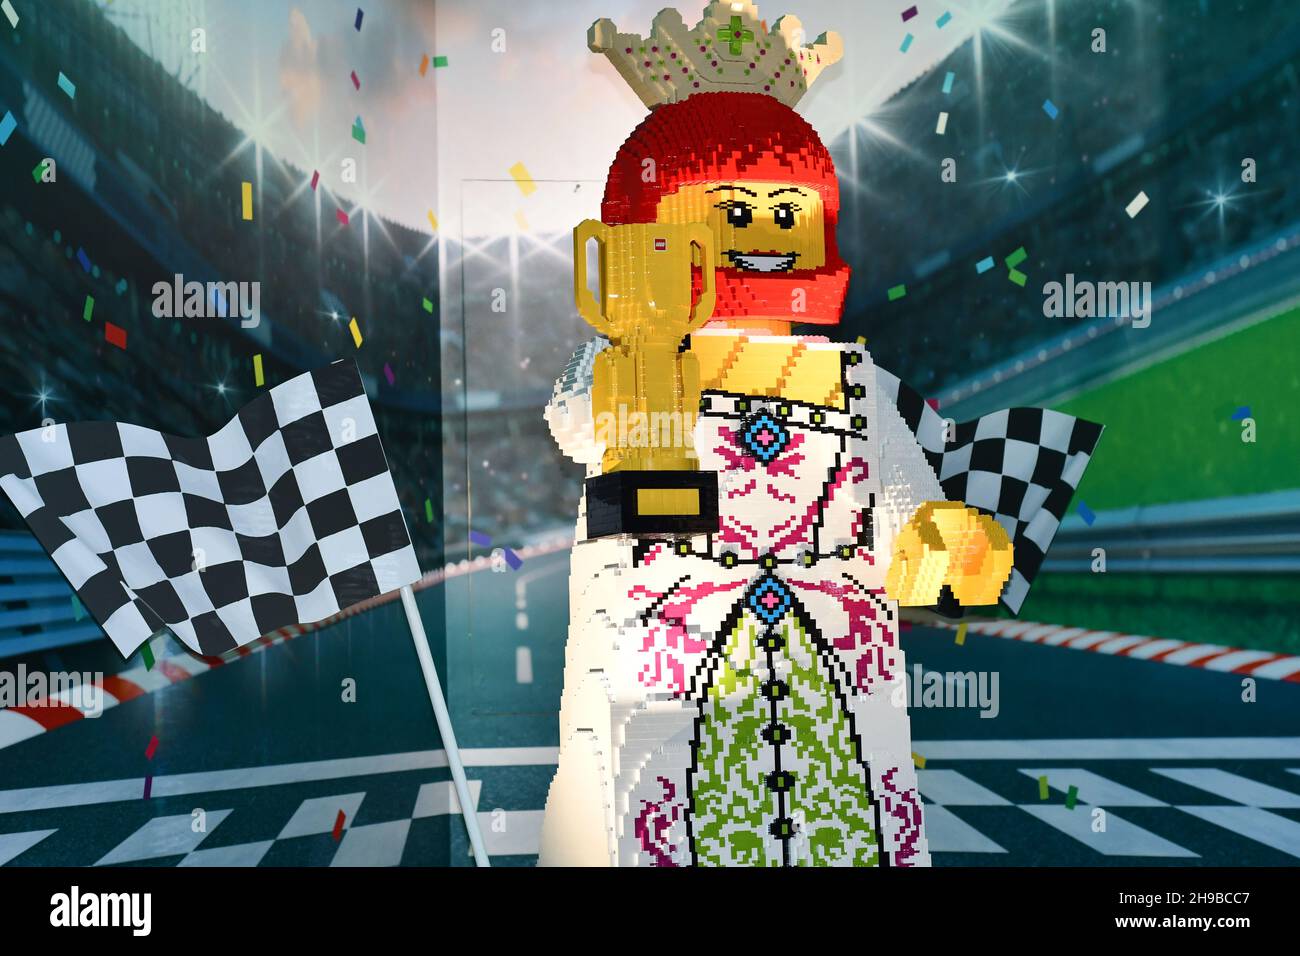 A Lego figure made out of Lego blocks of a racing car driver with a winners trophy with the backdrop of a racing circuit Stock Photo